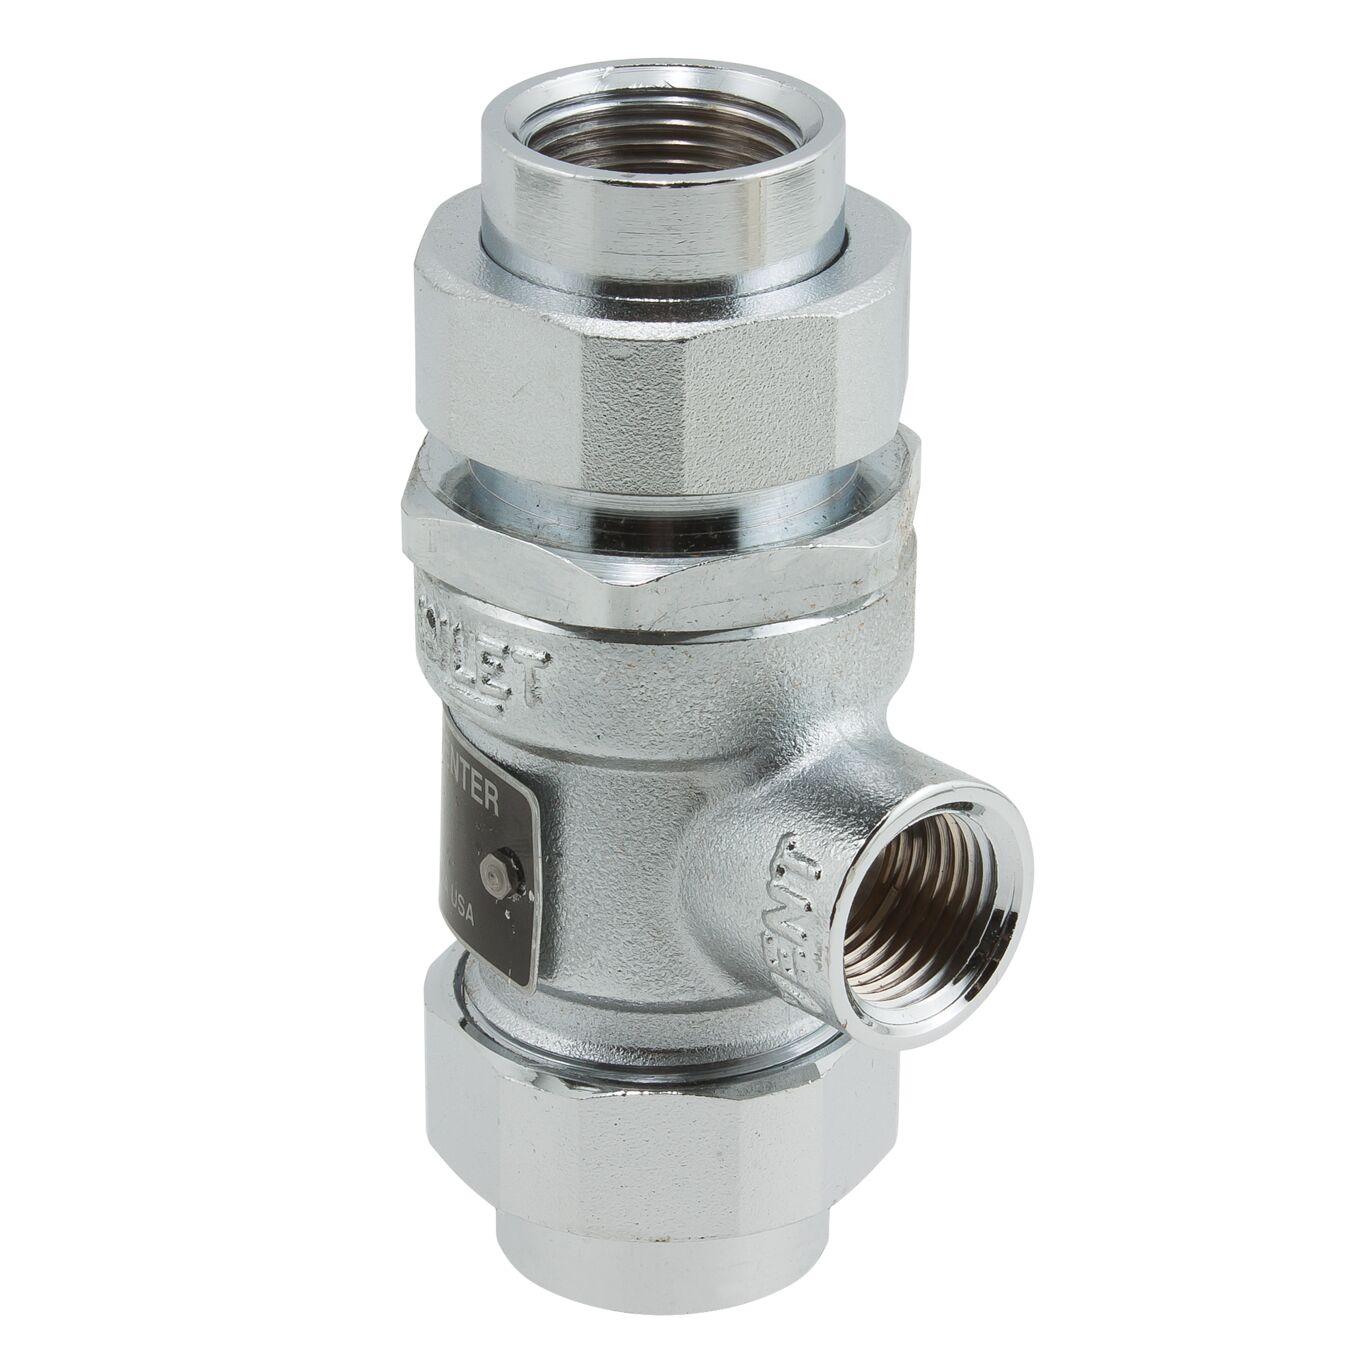 Watts 3/4" dual check with atmospheric vent Valve 9D-BS 